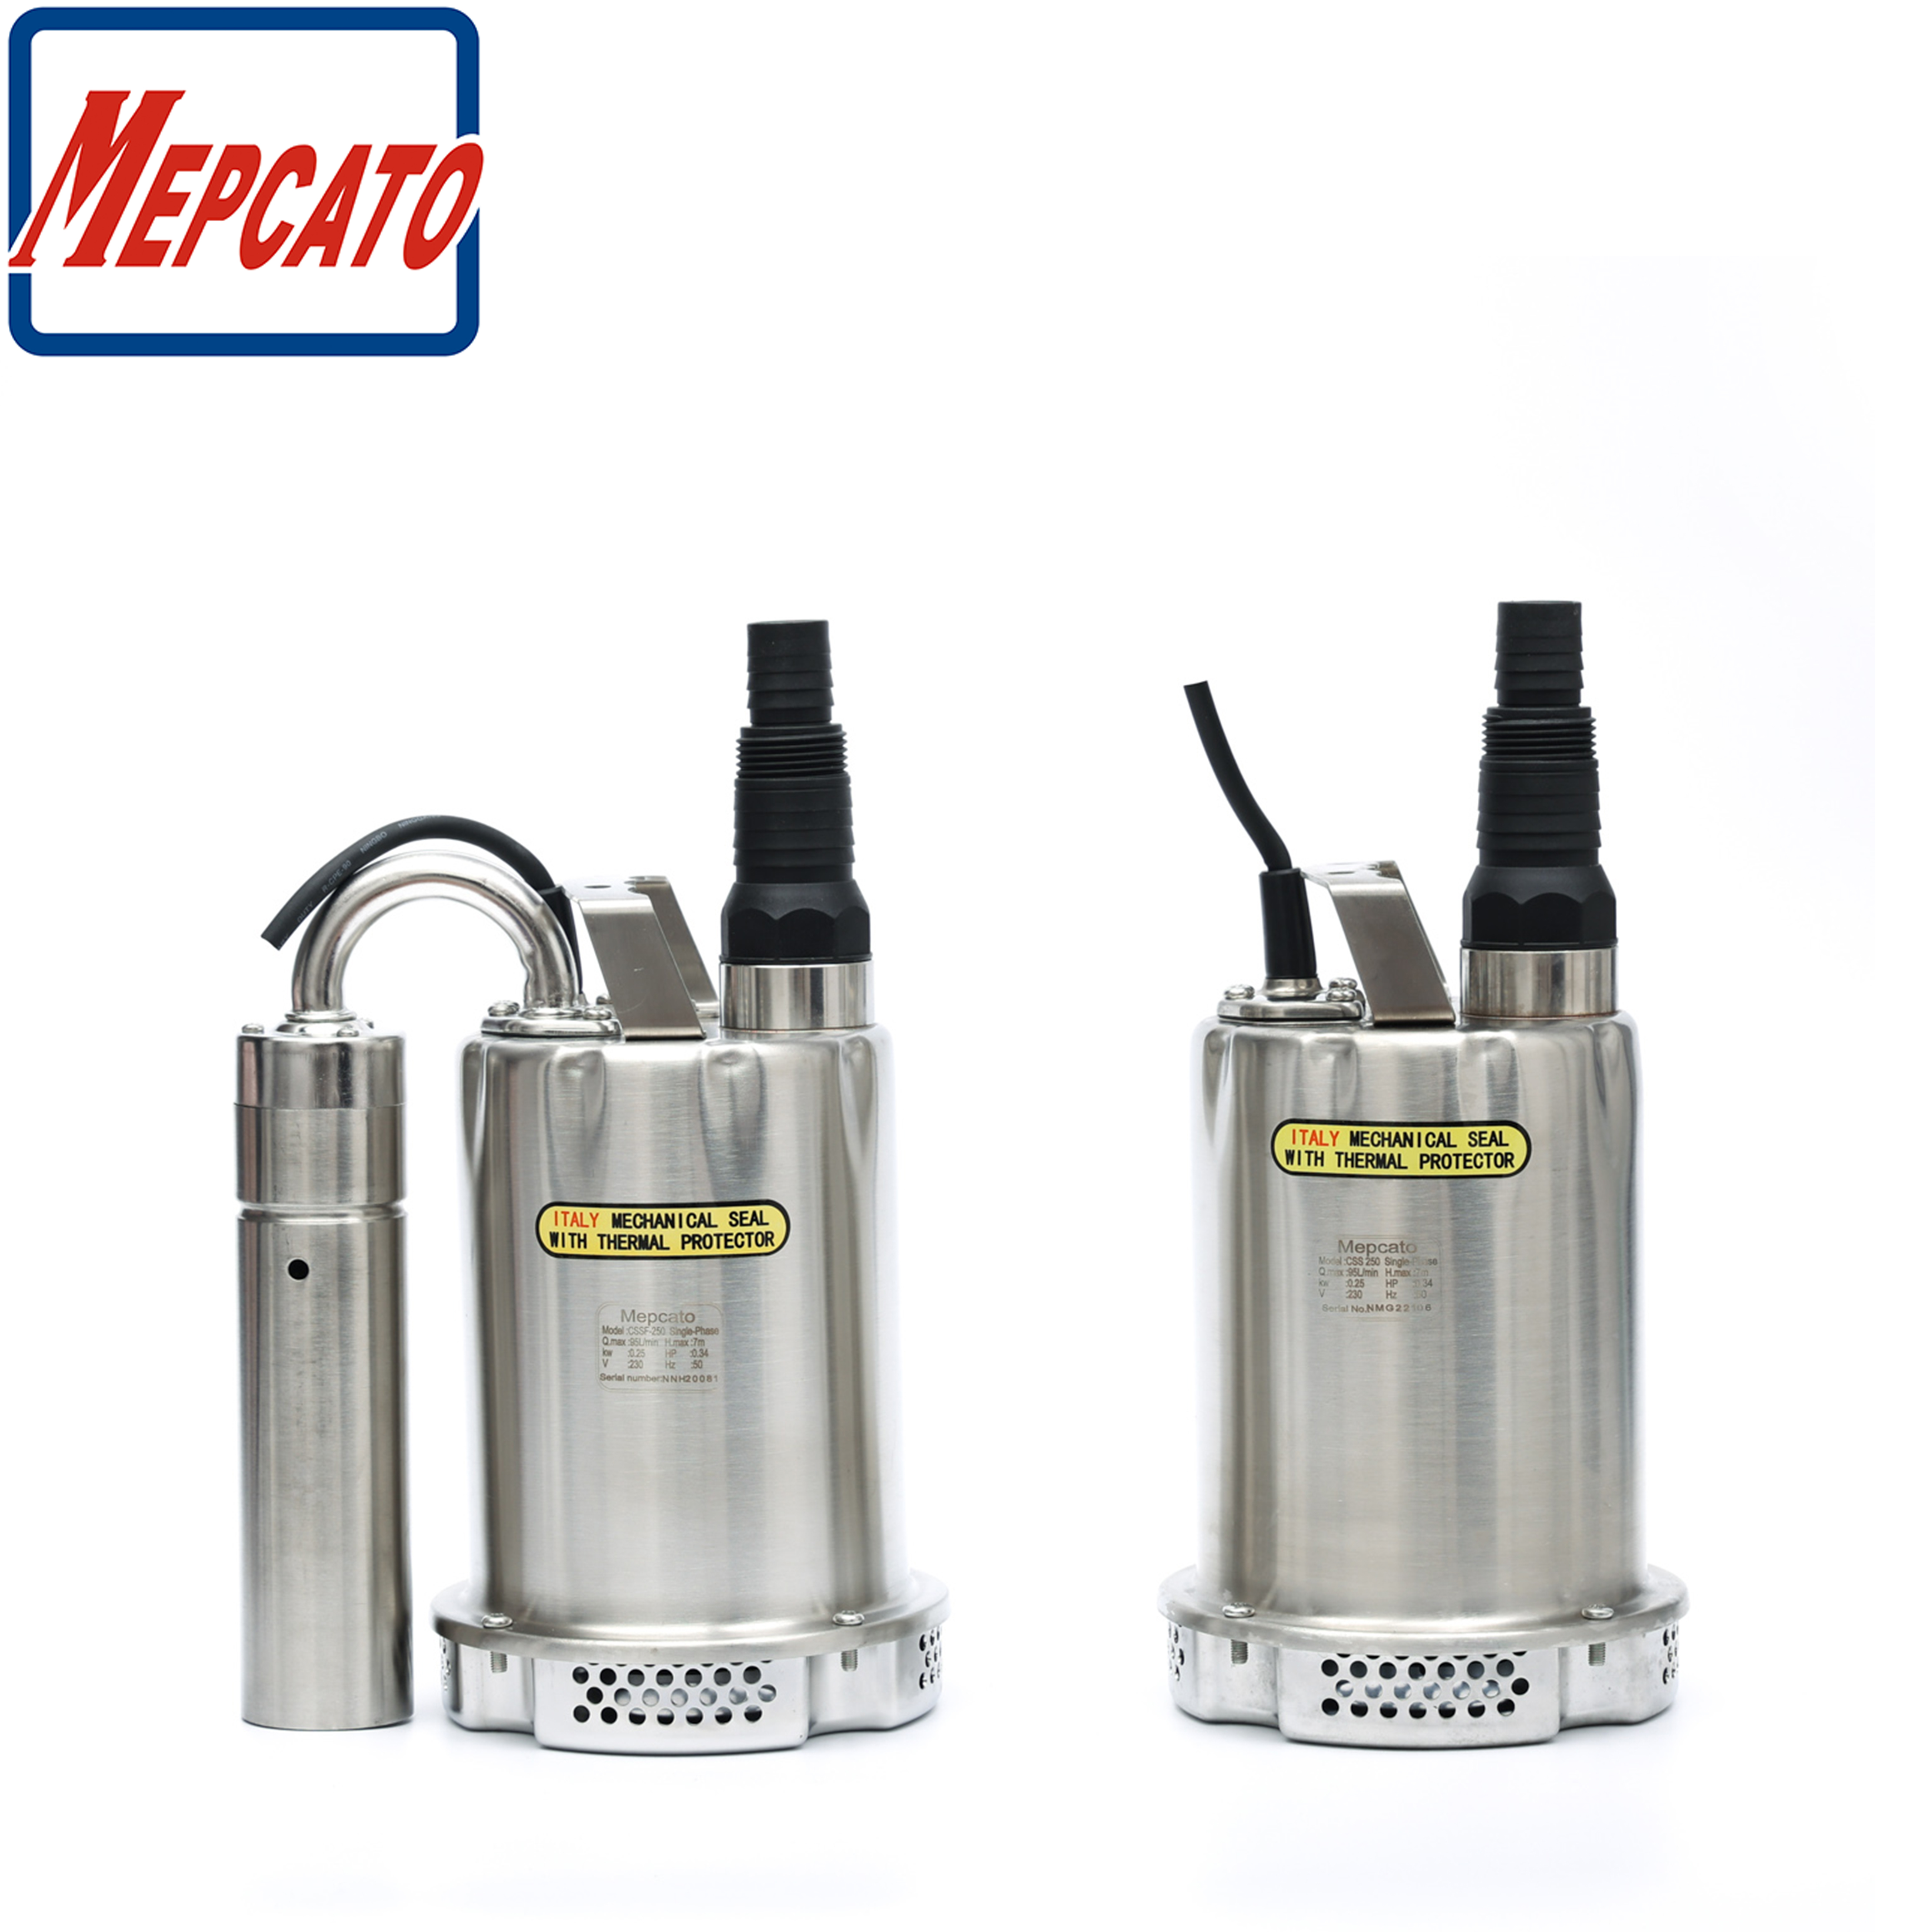 Utility Stainless Steel Submersible Pump